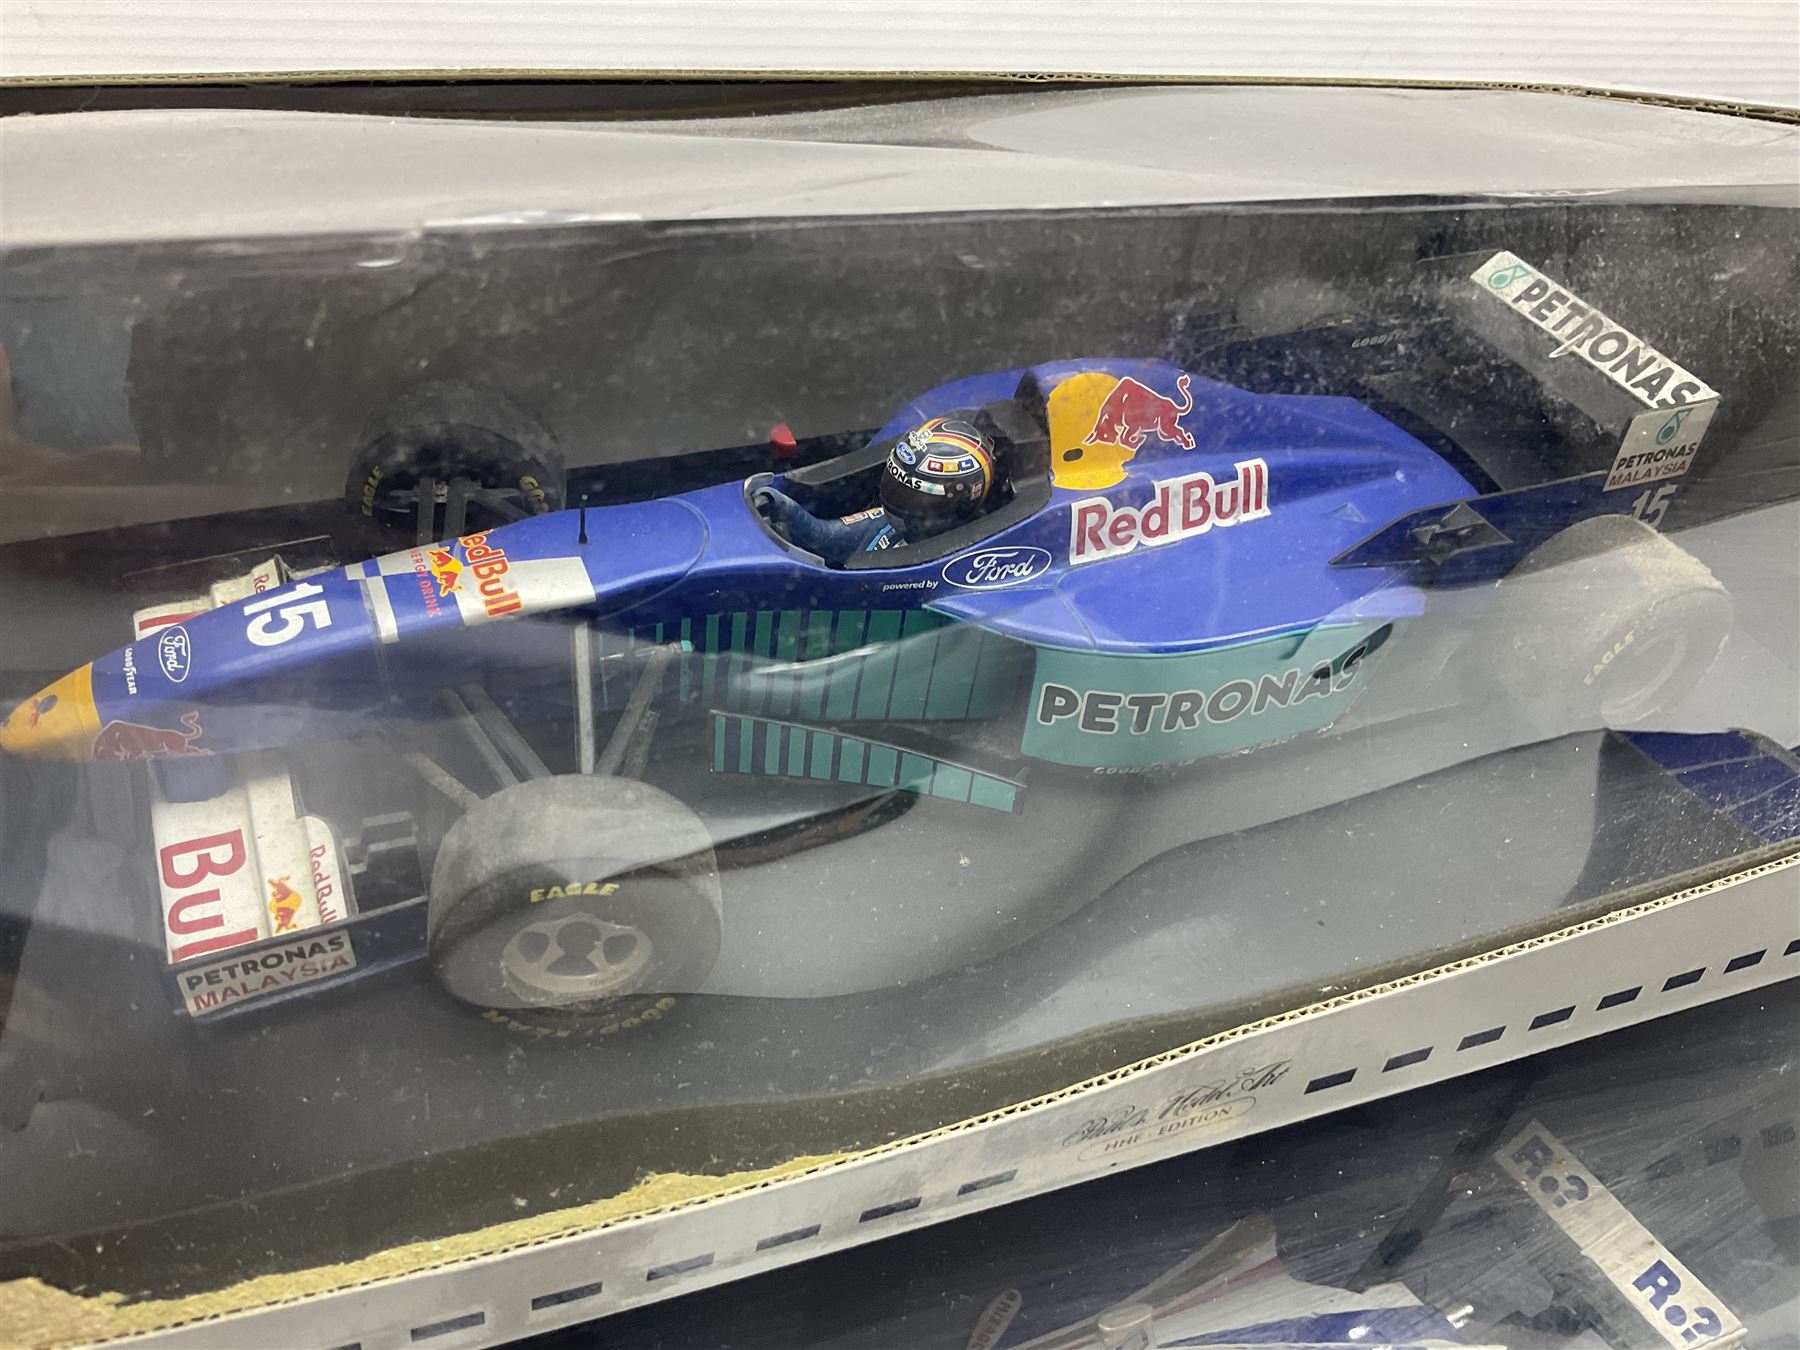 Three Paul's Model Art 1:18 scale die-cast racing cars - Grand Prix Williams Renault FW16 D. Hill; H - Image 3 of 10